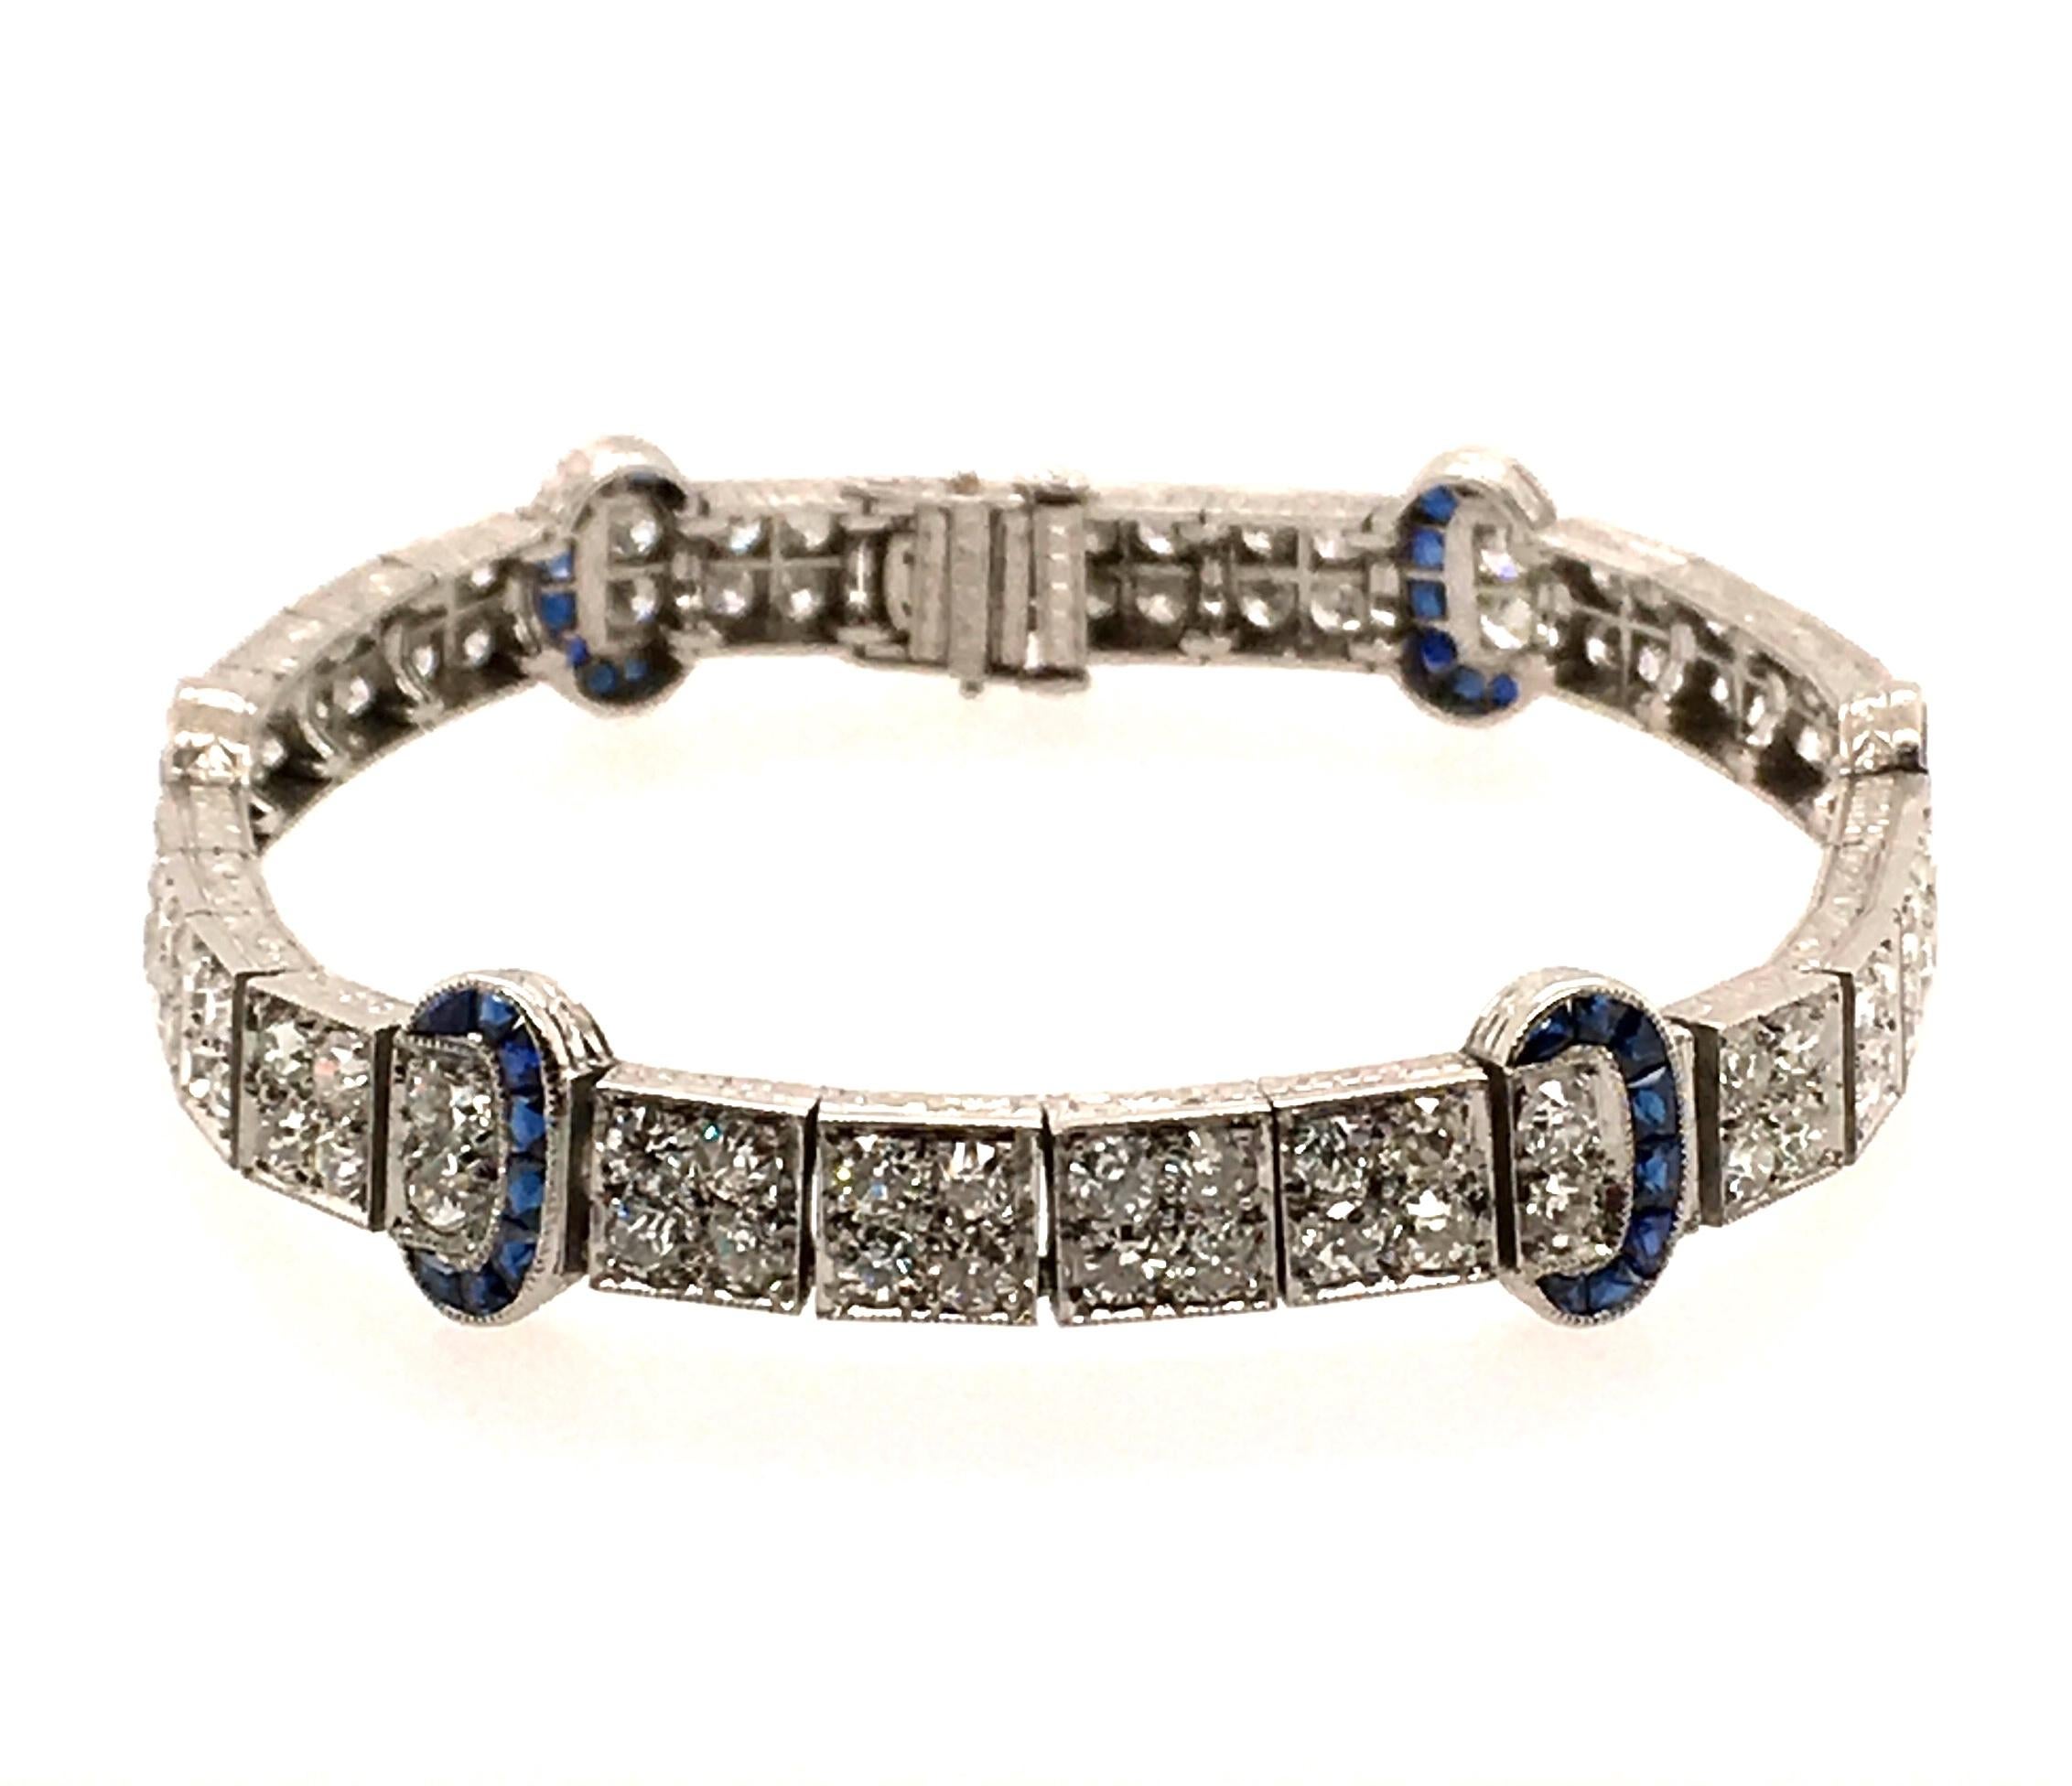 An art deco platinum, diamond and sapphire bracelet. Circa 1925. Designed as a pave set diamond flexible band, enhanced by French cut sapphire buckle motifs. One hundred and four  old European cut diamonds weigh approximately 4.70 carats. Length is